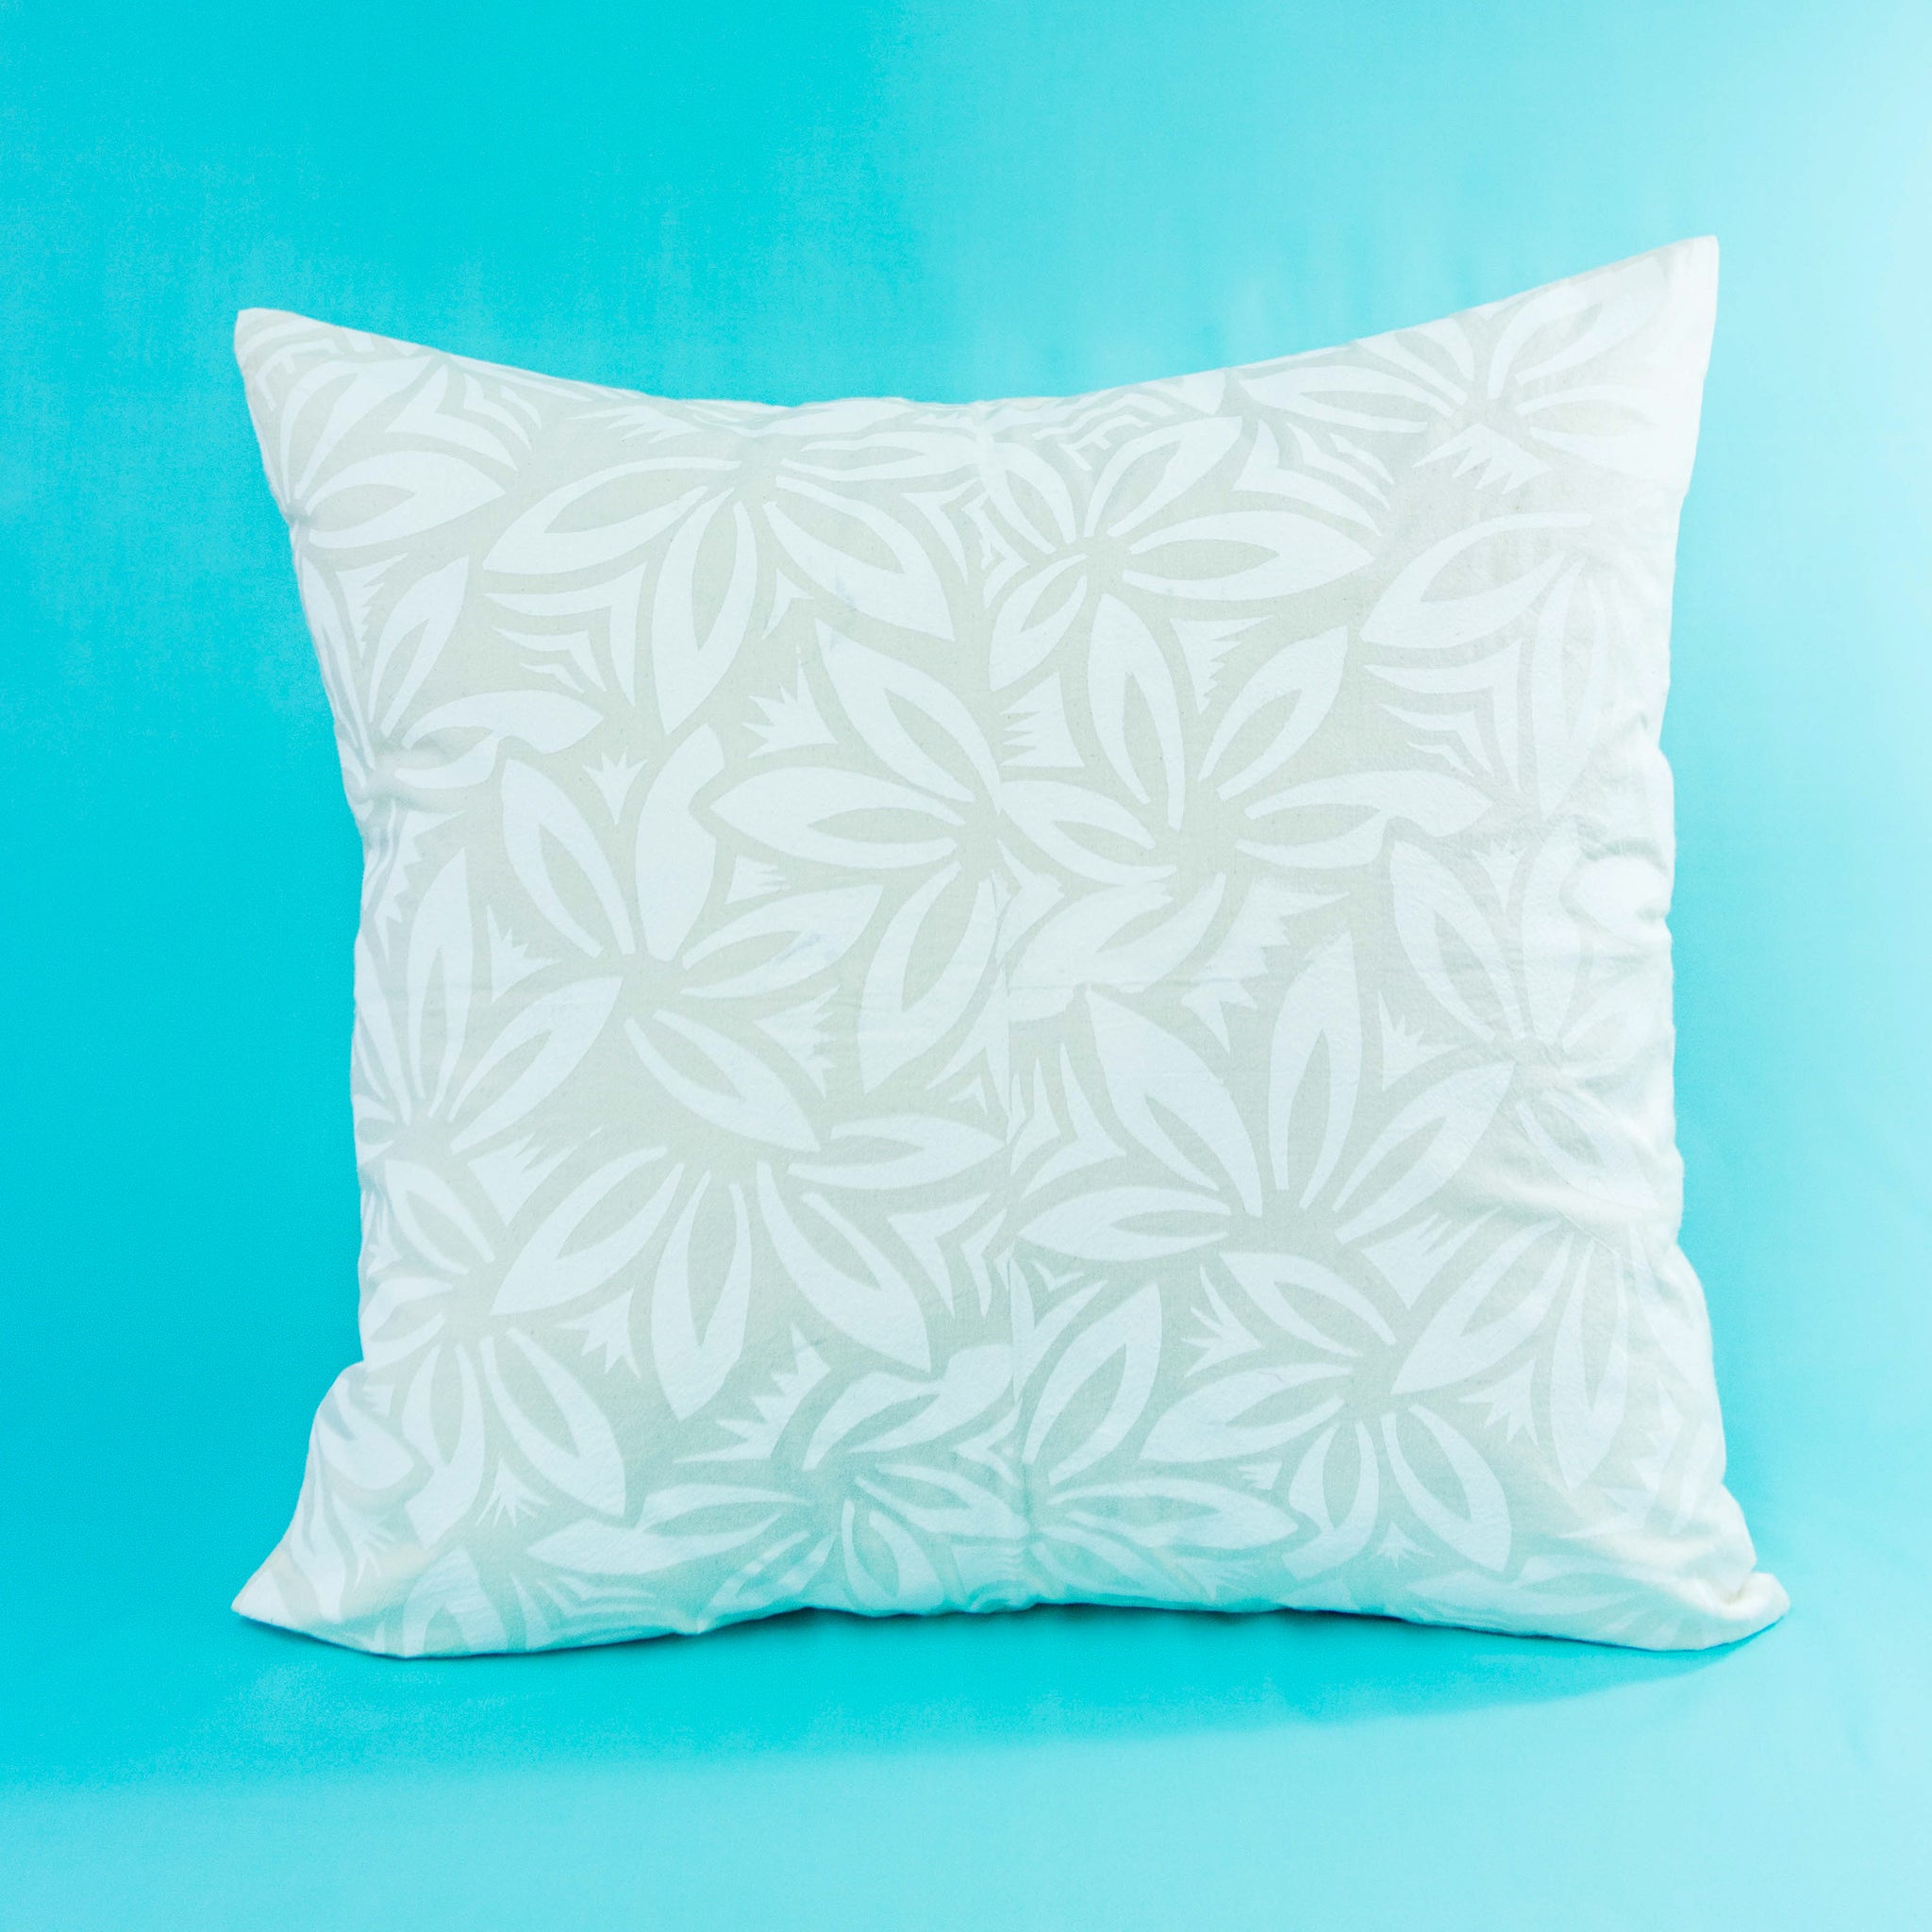 Cushion Cover "Fanned Leaves"